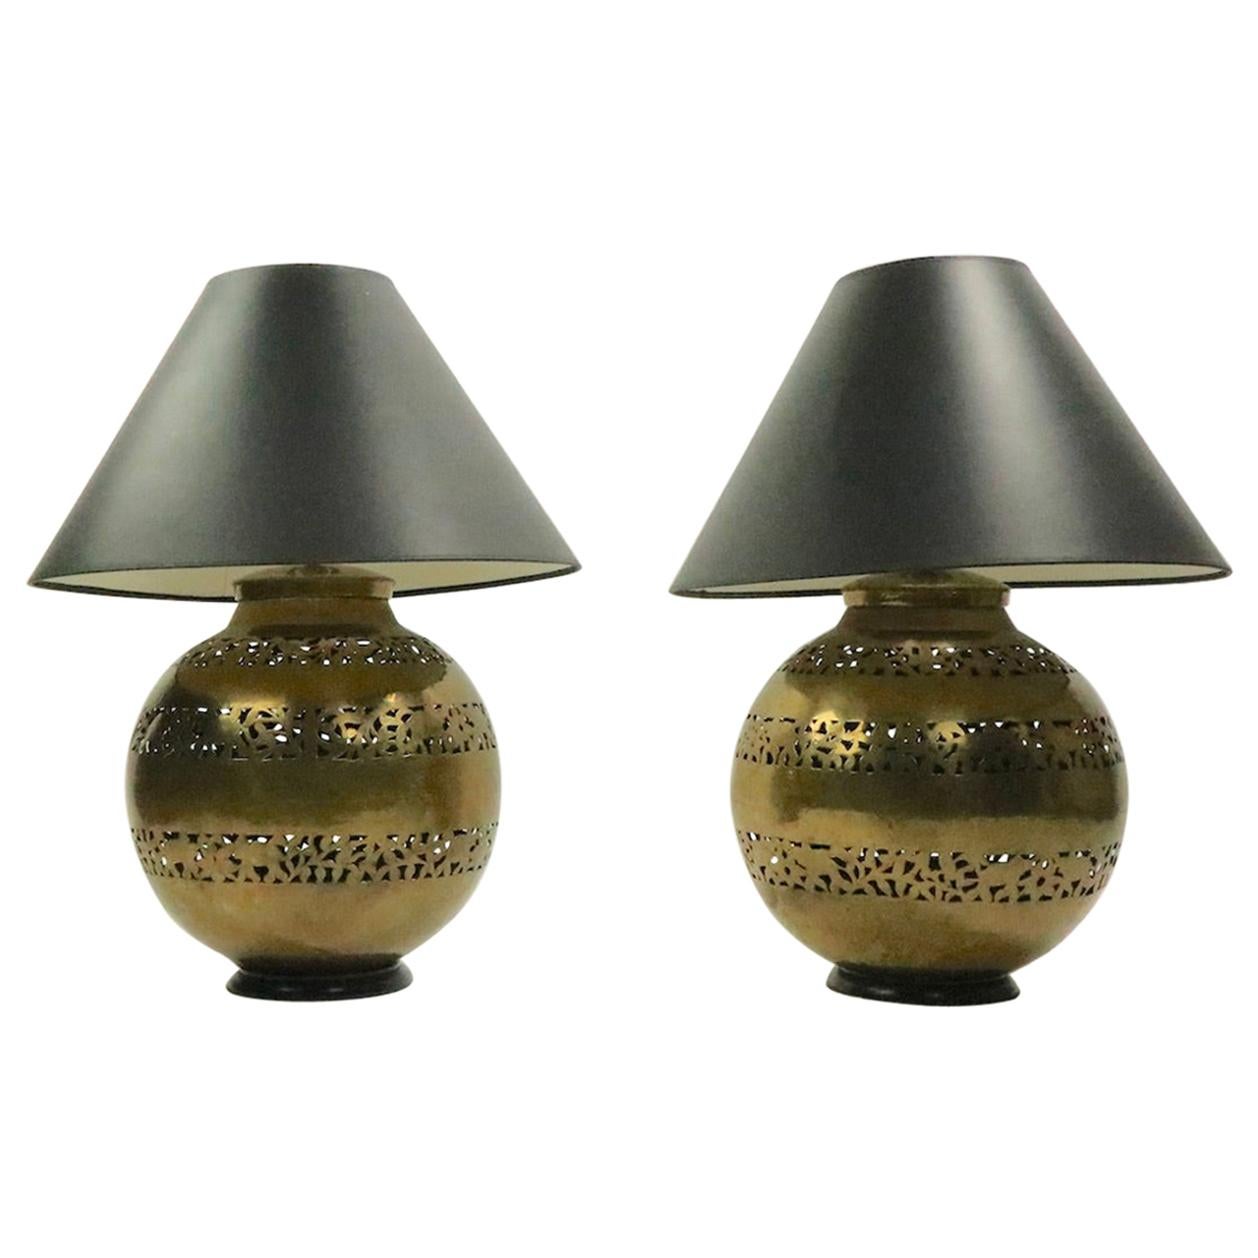 Decorative Pair of Pierced Brass Ball Form Table Lamps